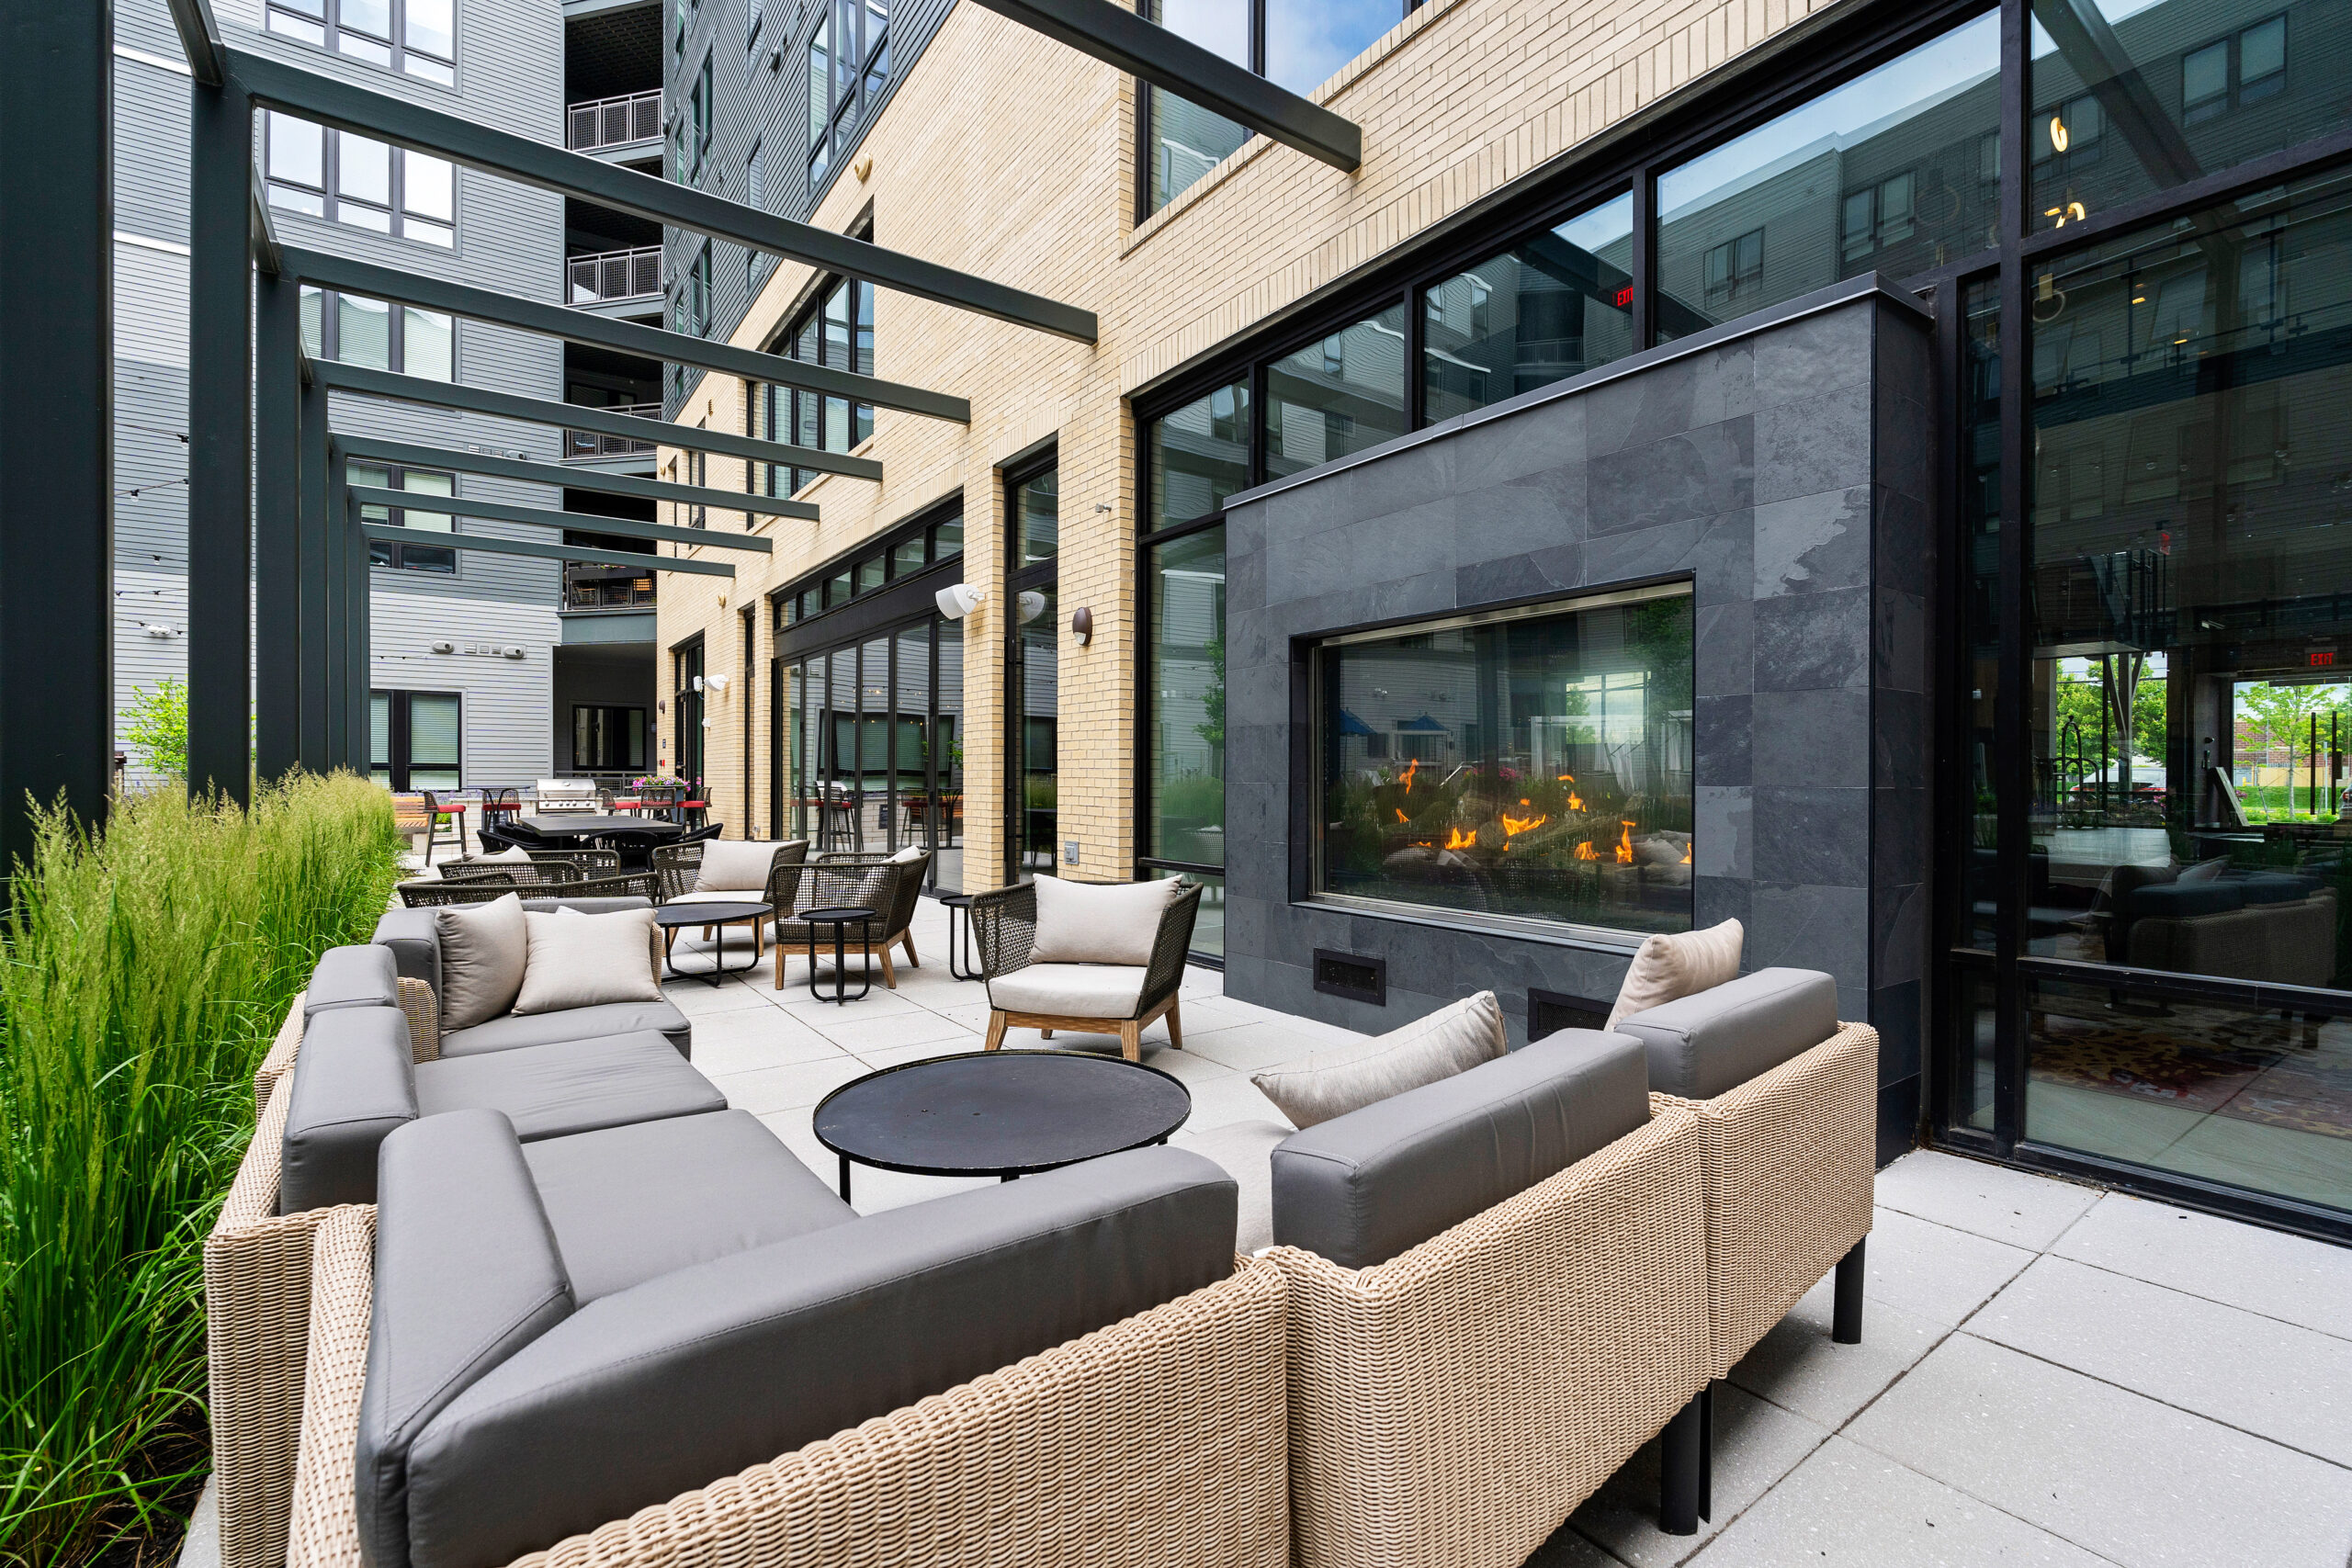 Outdoor lounge area with fireplace